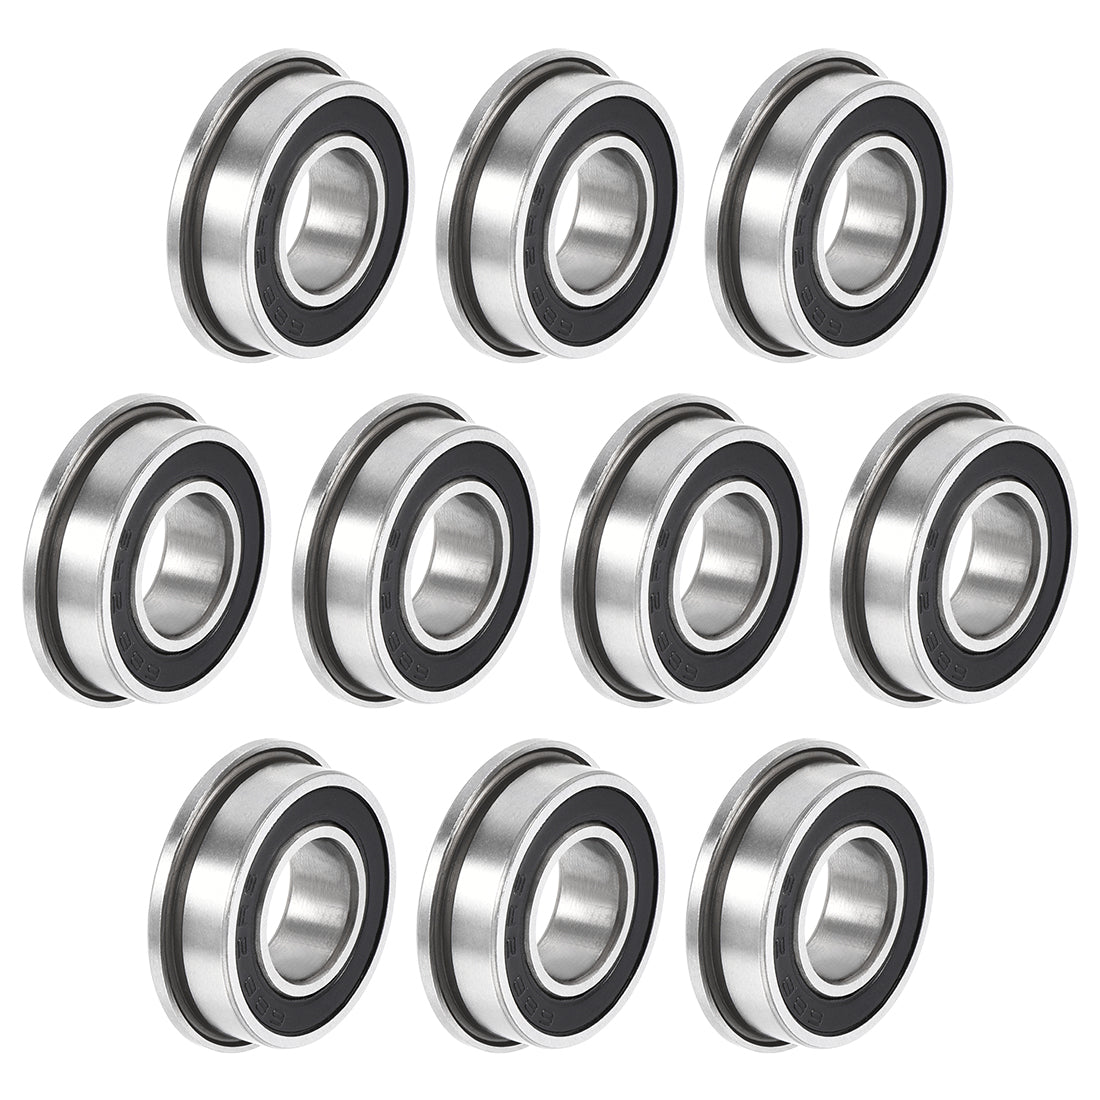 uxcell Uxcell F688-2RS Flange Ball Bearing 8mmx16mmx5mm Double Sealed Bearing 10 Pcs